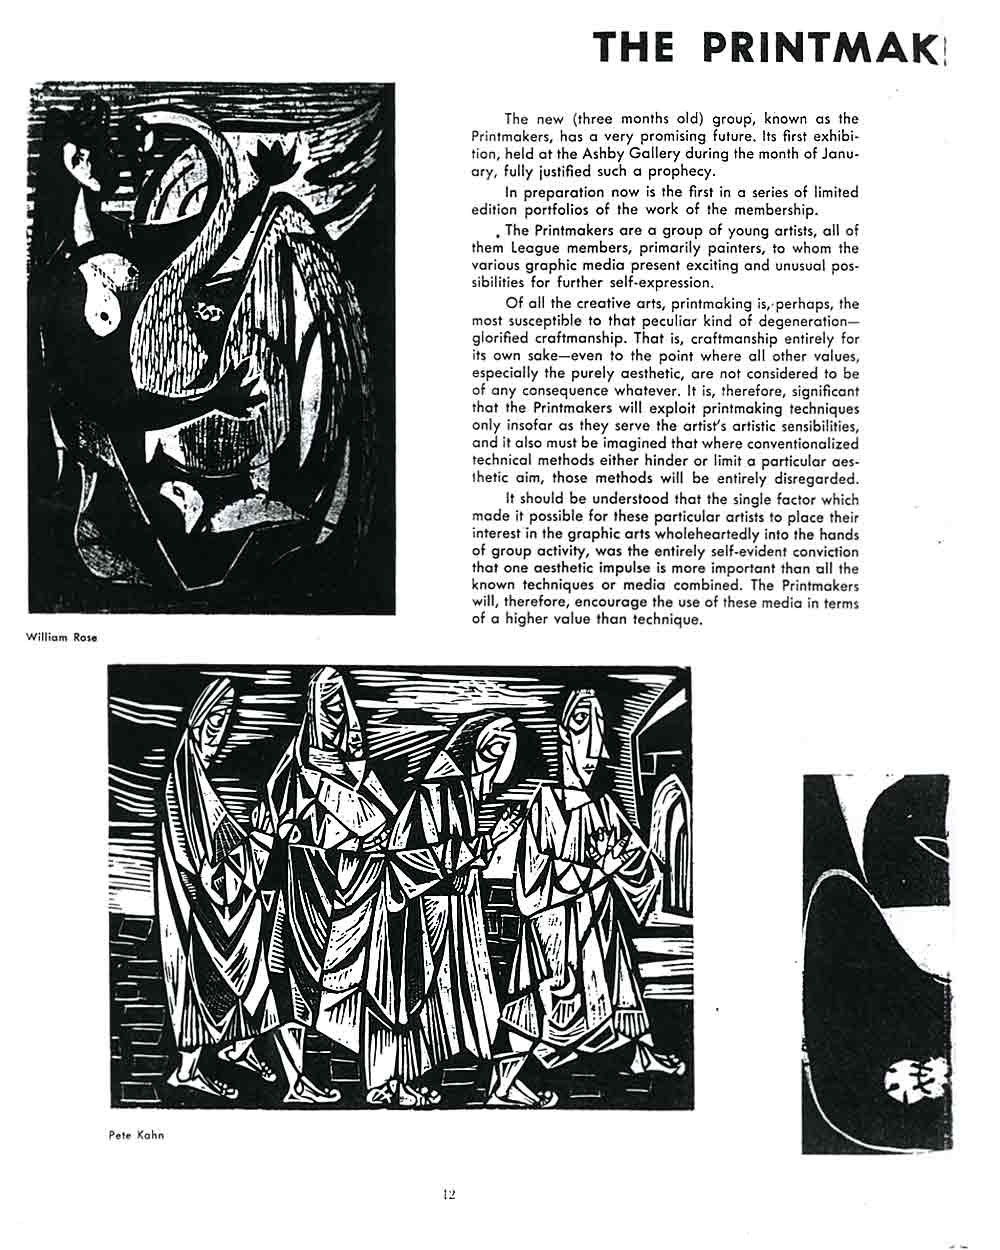 The Printmakers, pg 1